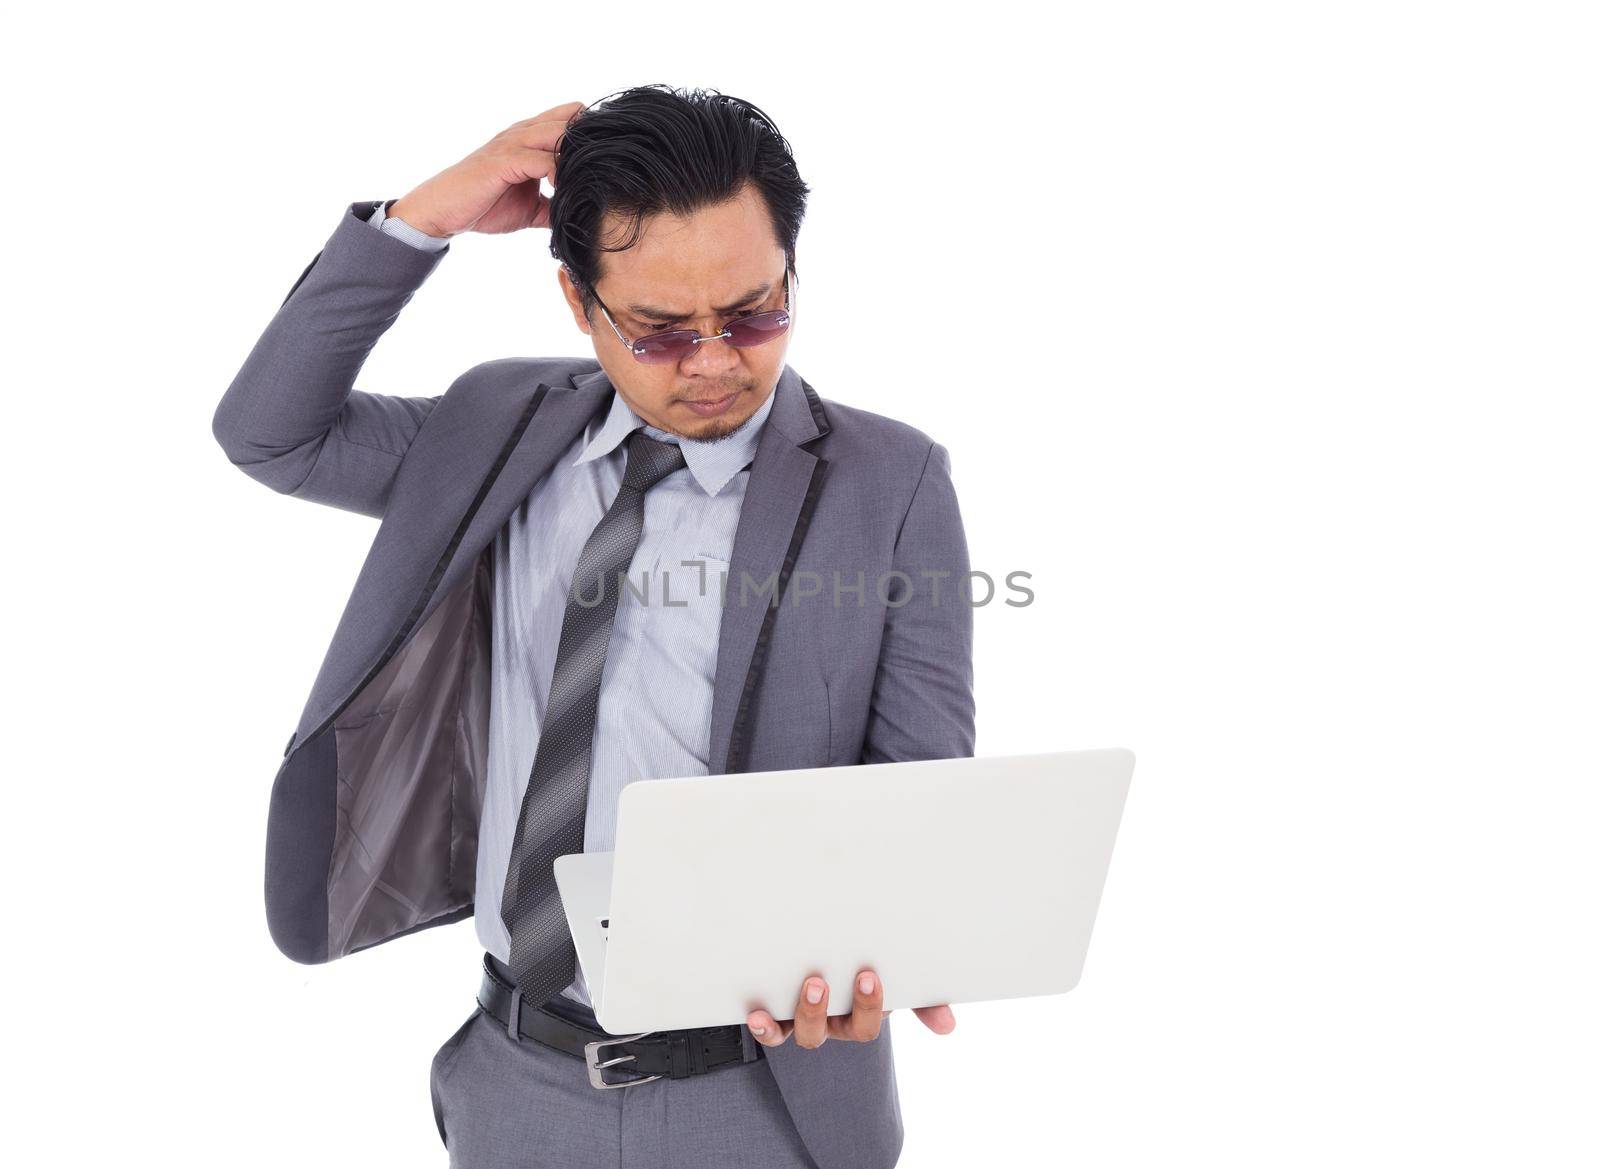 business man with headache and having problems on laptop isolated on white background by geargodz